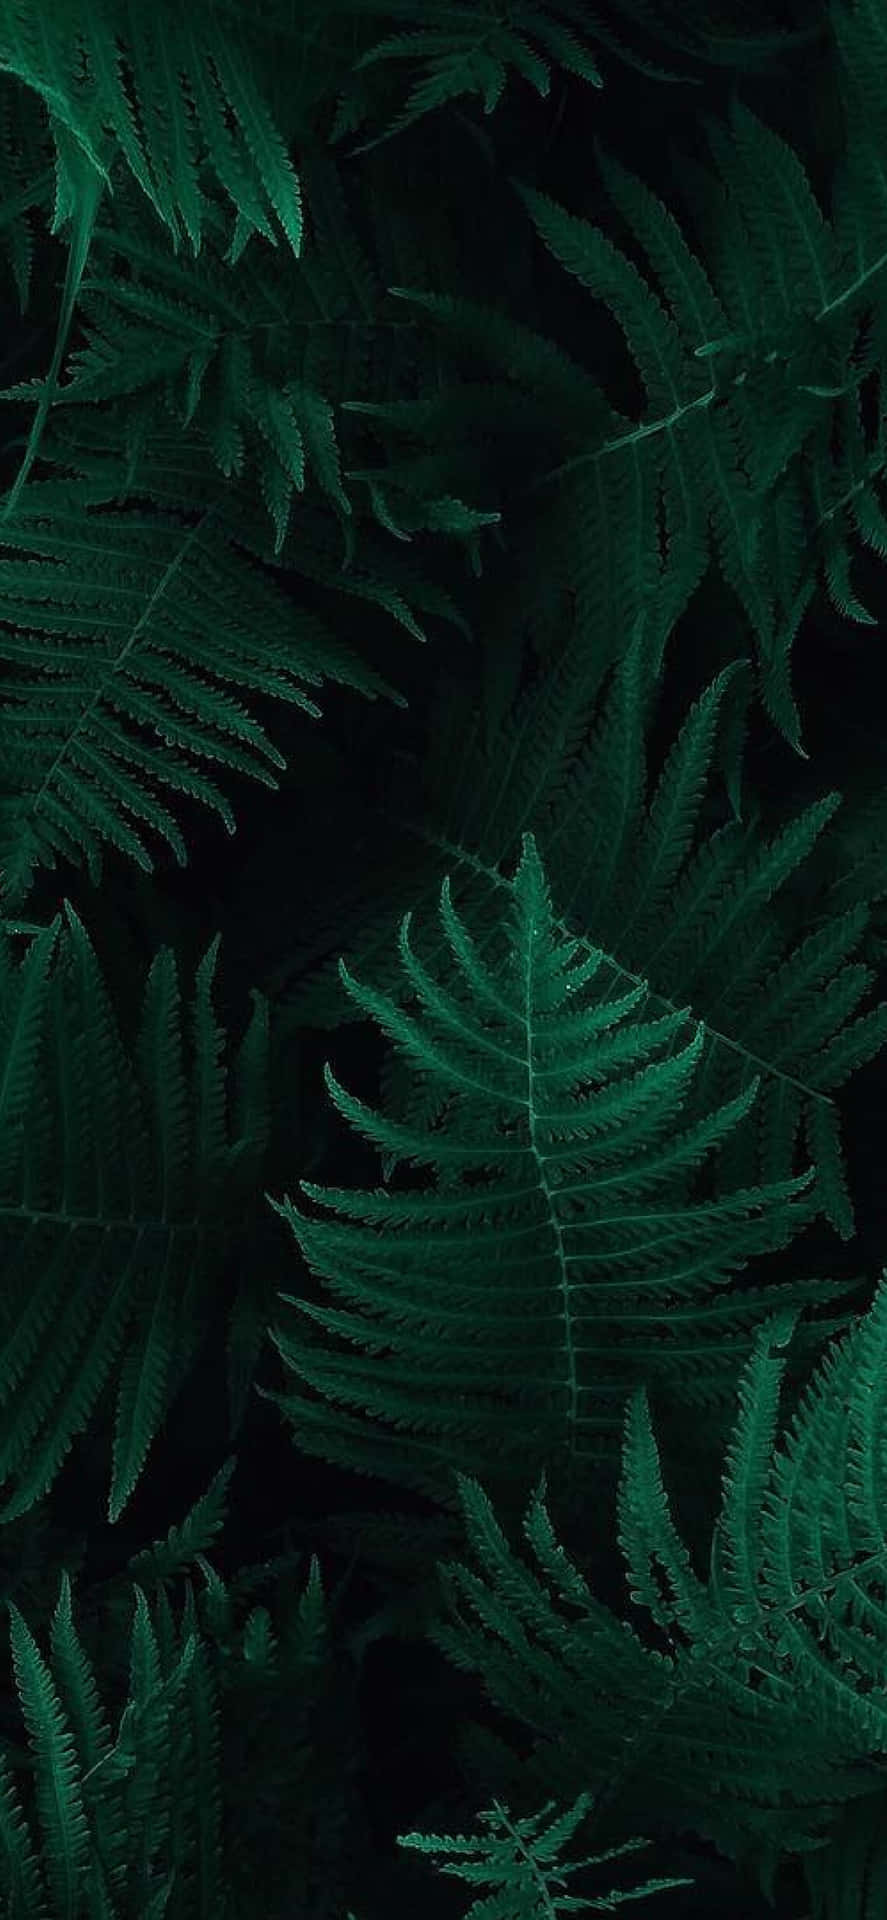 Fern Leaves Wallpaper - Wallpapers For Iphone